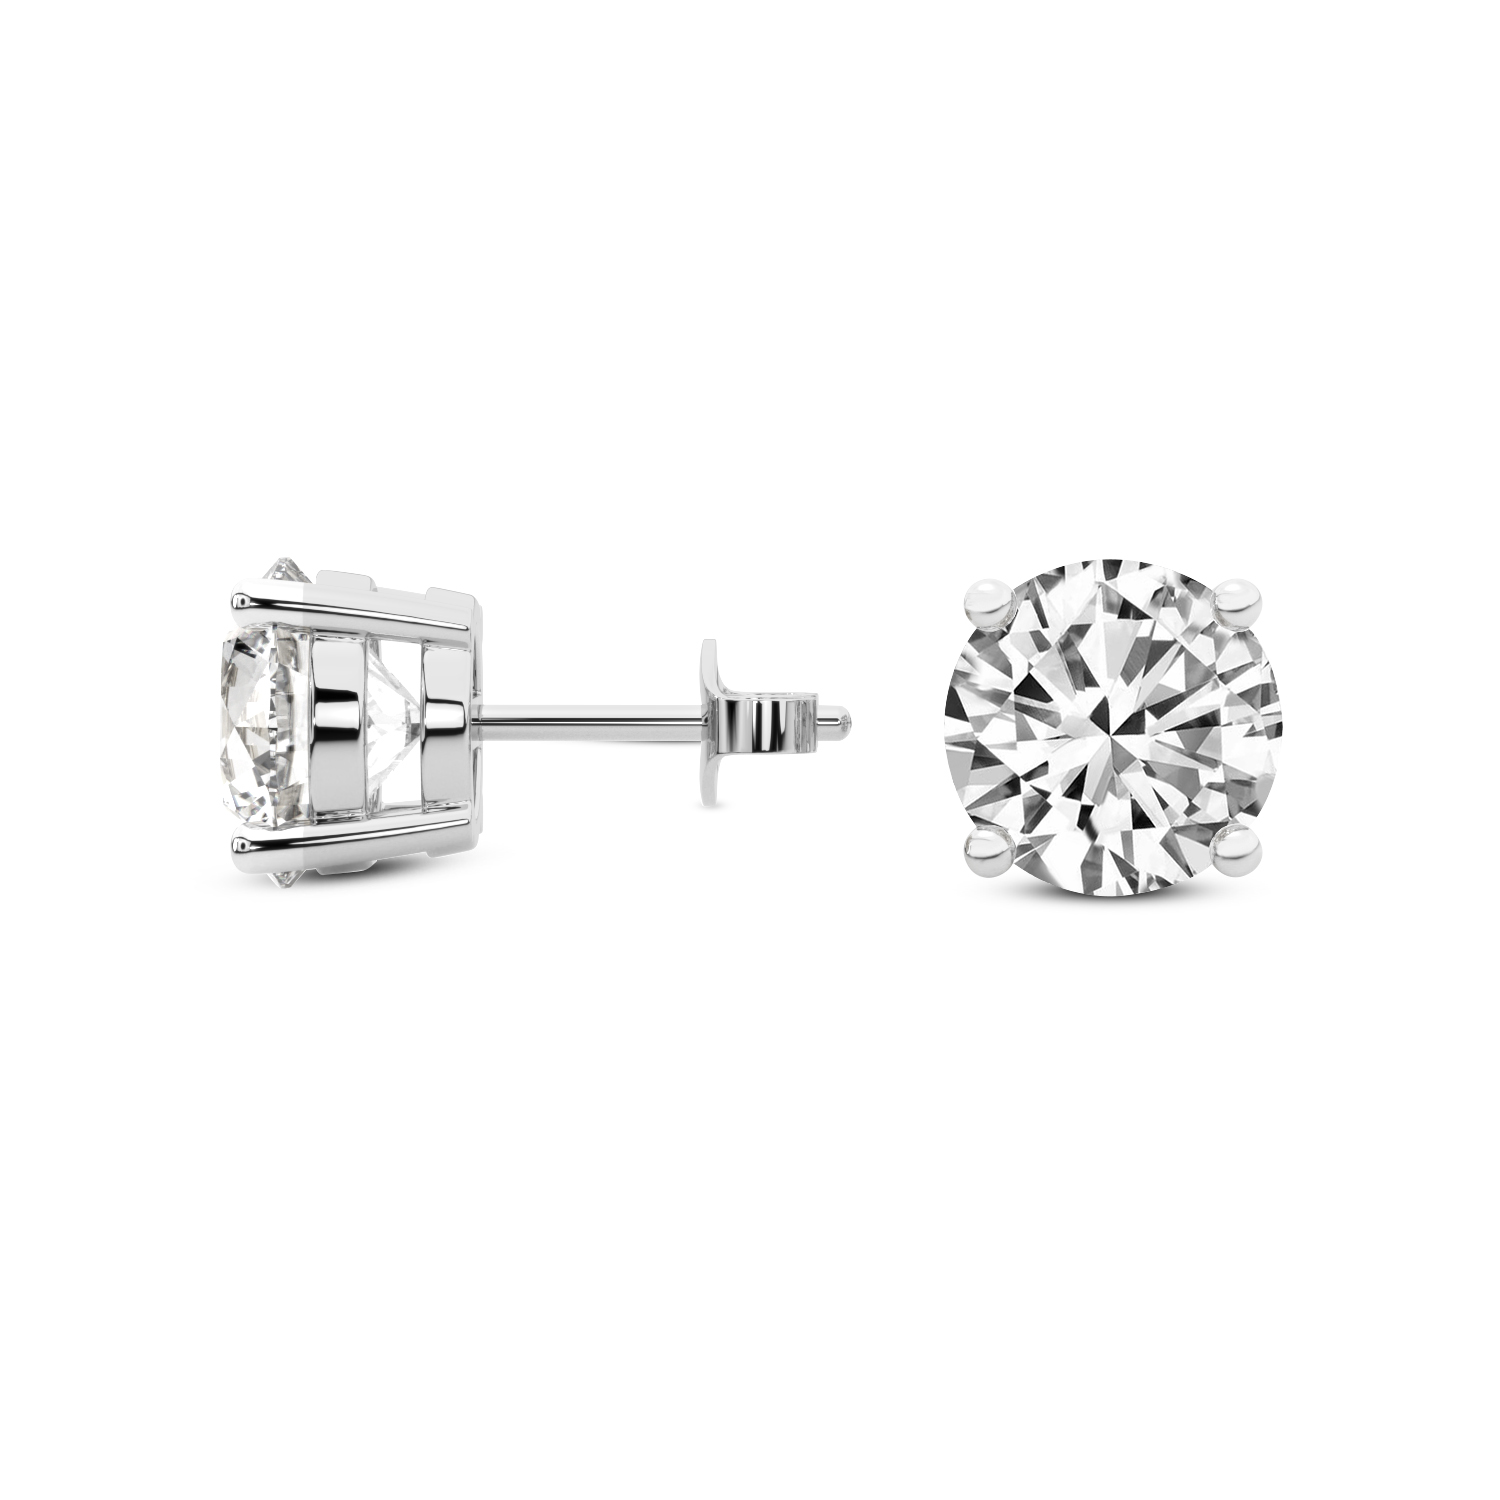 4 Prong Round Lab Diamond Stud Earrings in 14k White Gold.